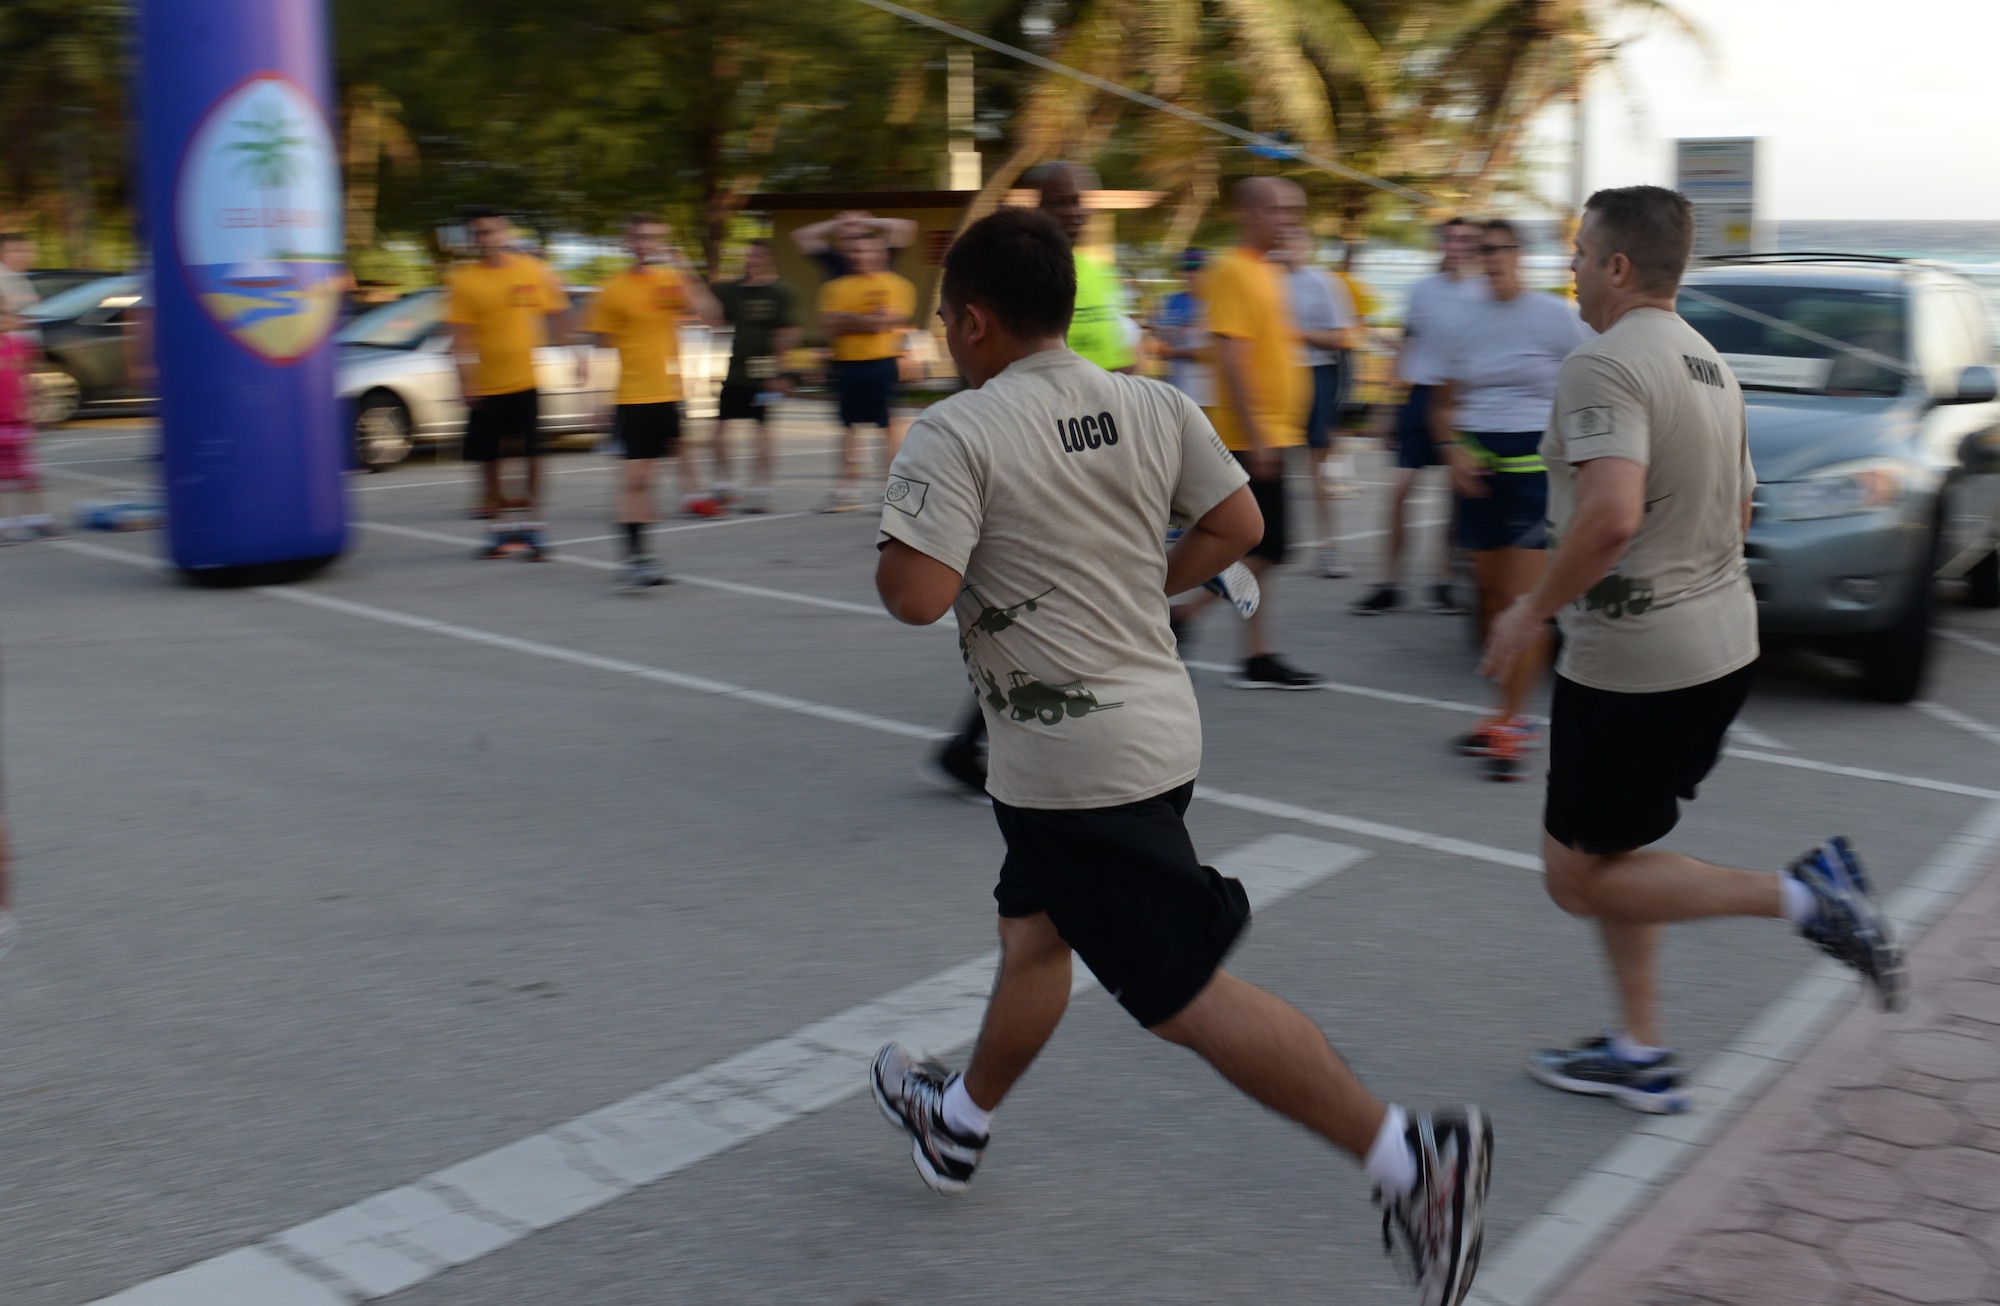 Members of Team Andersen sprint to the finish line during the Women’s History Month 5K March 6, 2015, at Andersen Air Force Base, Guam. More than 150 participants from across the base joined together to kick-off the first event of Women’s History Month. (U.S. Air Force photo by Senior Airman Amanda Morris/Released)